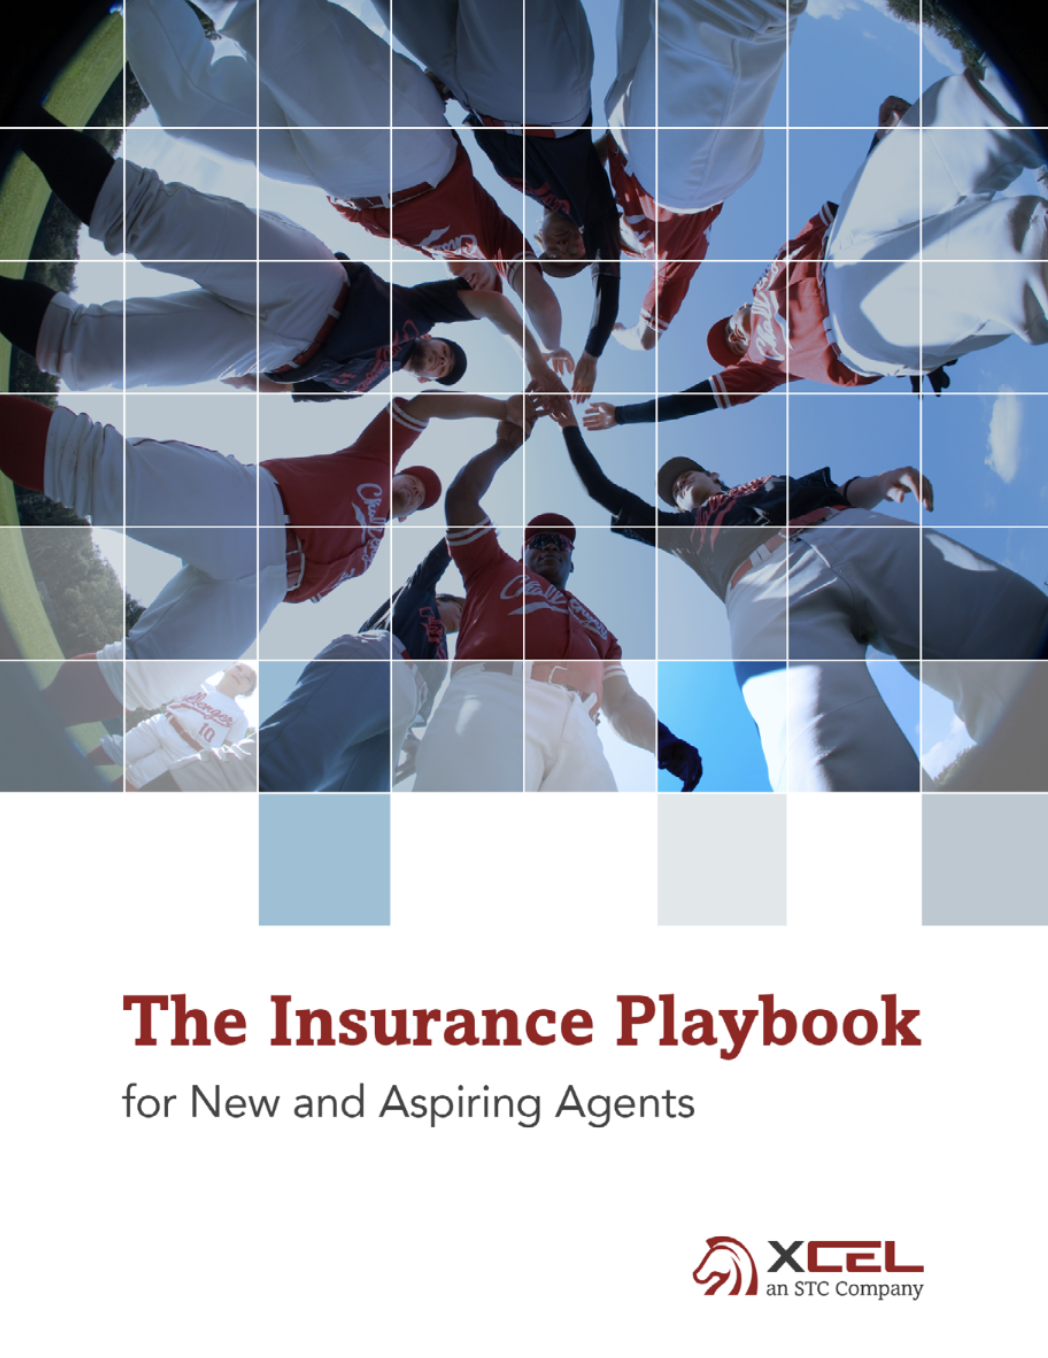 The Insurance Playbook